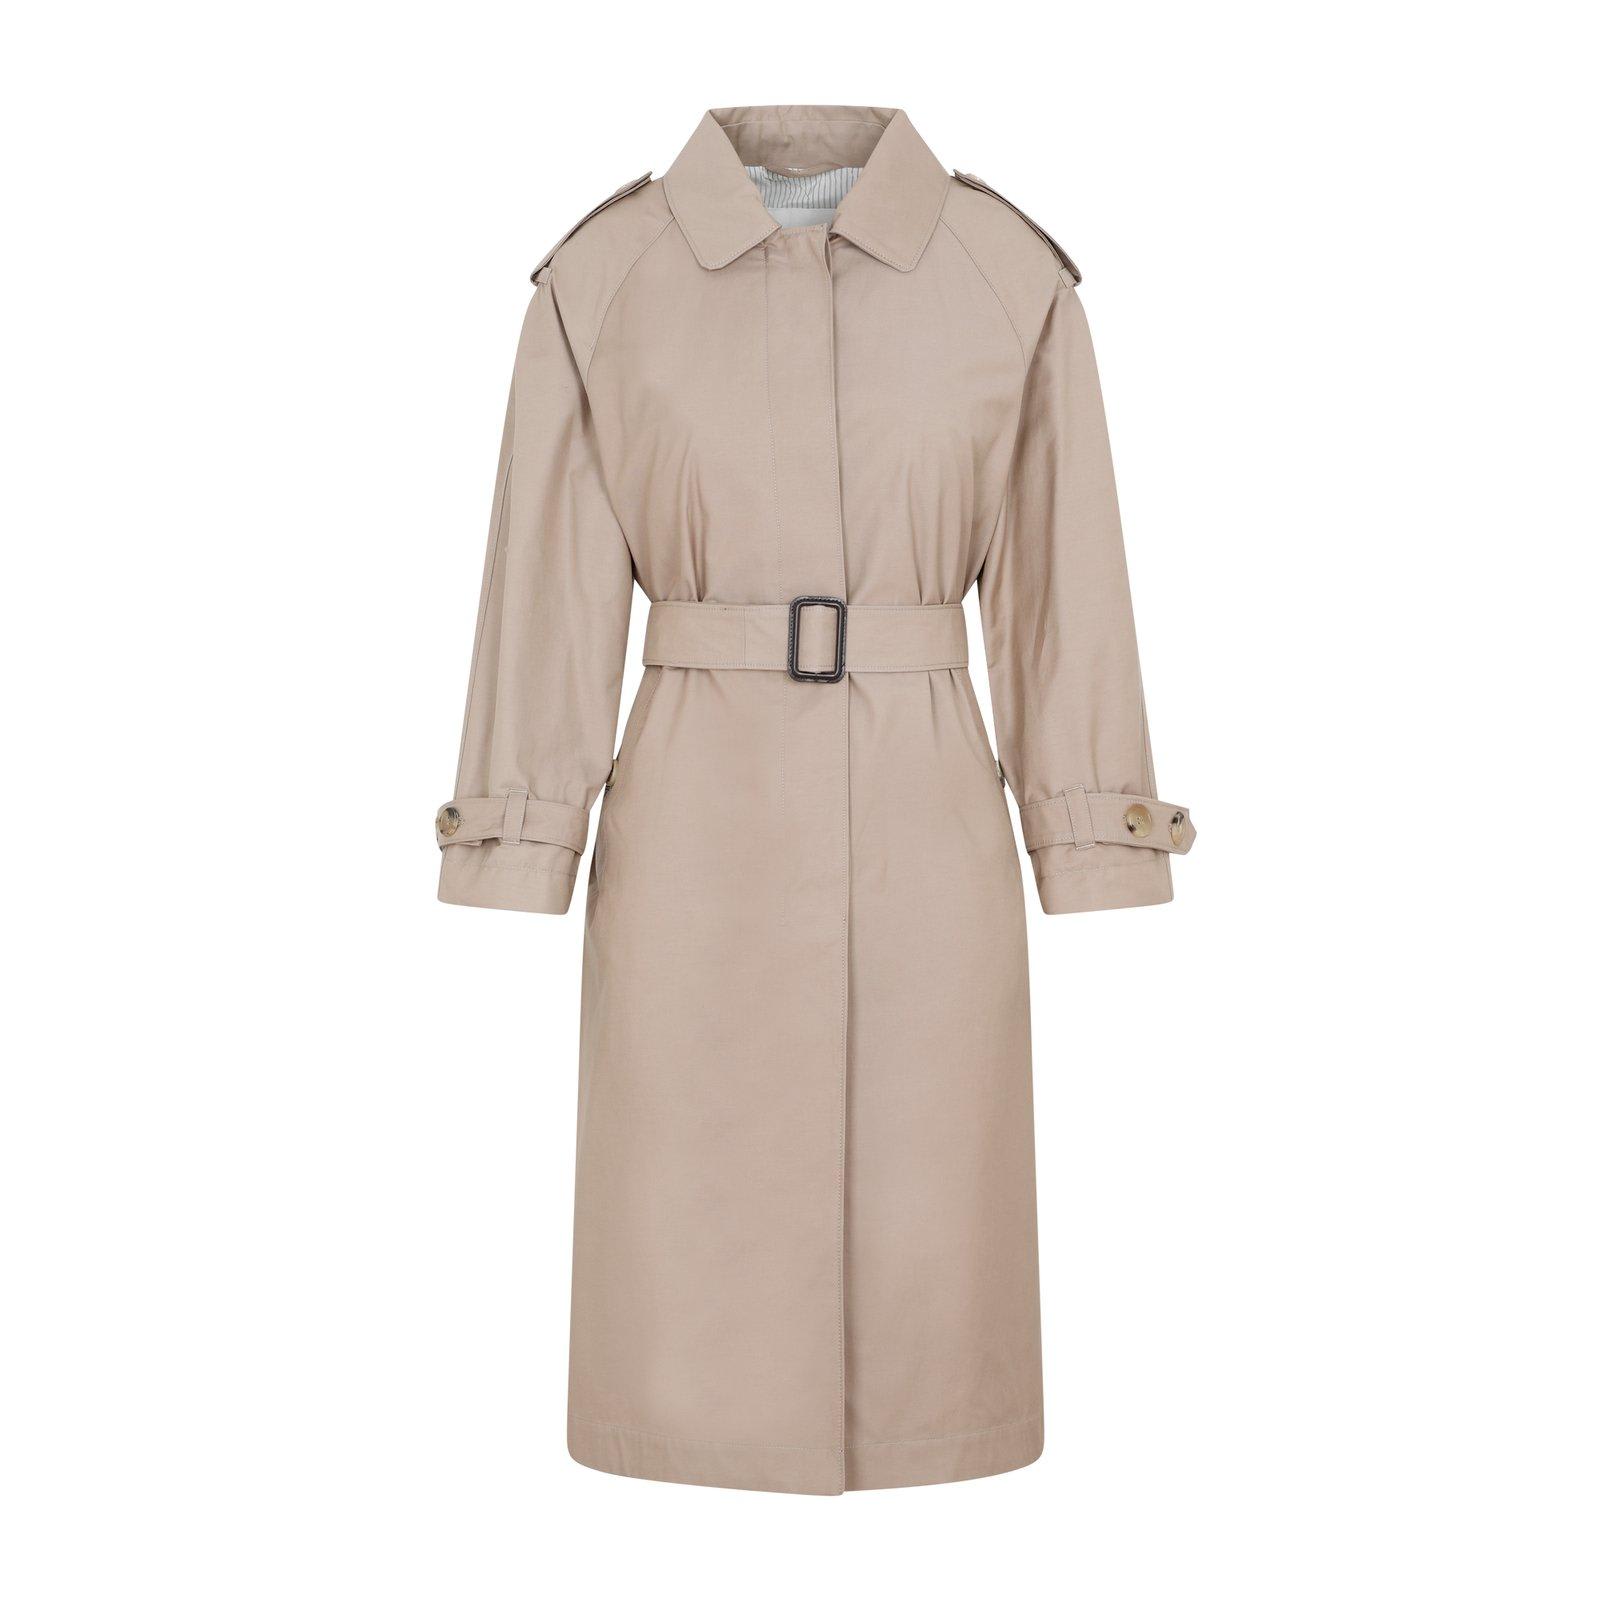 Max Mara The Cube Rtrench Trench